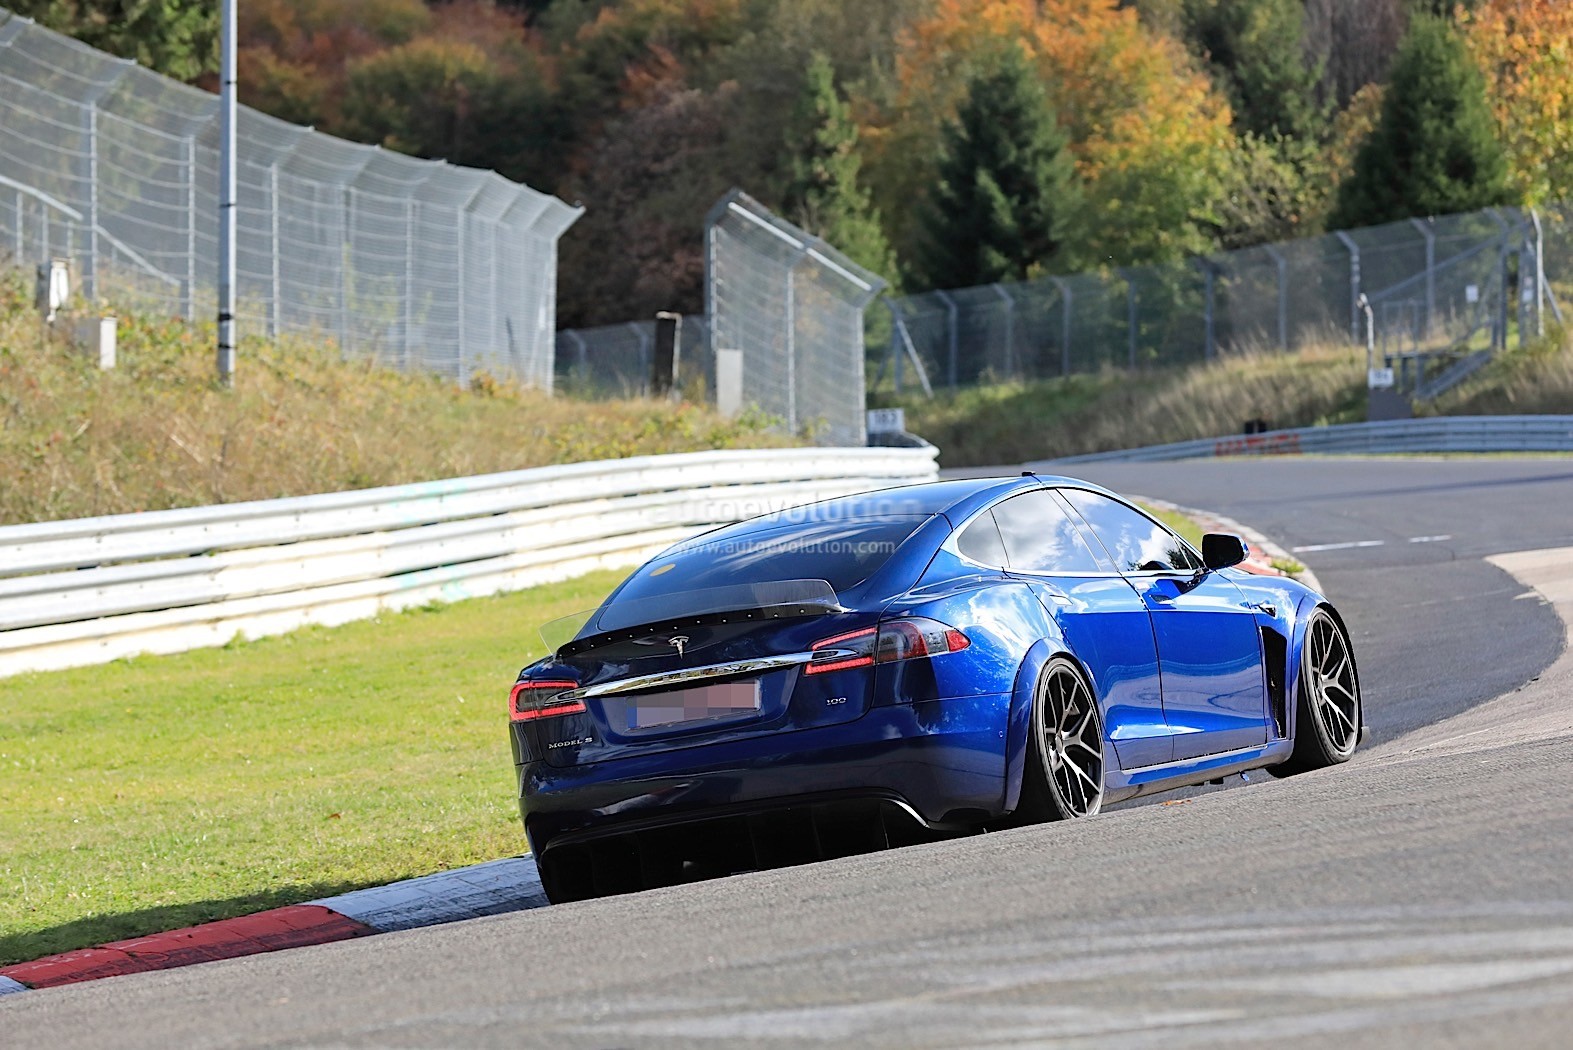 tesla-model-s-plaid-loses-giant-rear-wing-does-one-nurburgring-lap-at-a-time_4.jpg